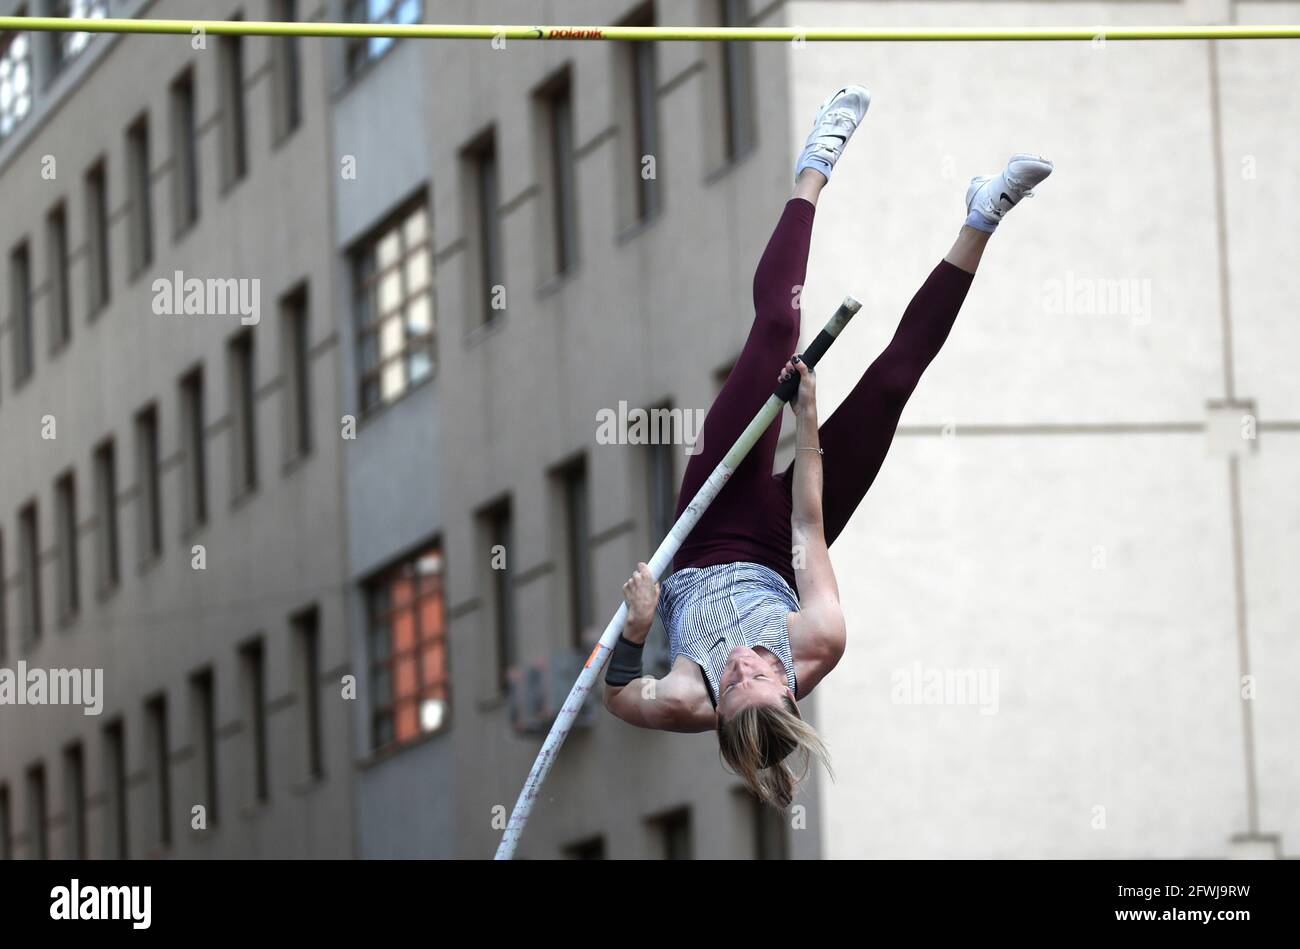 Moscow Russia 23rd May 21 Russian Pole Vaulter Anzhelika Sidorova Is Seen During A Training Session At The Znamensky Brothers Olympic Centre Ahead Of The Forthcoming Summer Olympics In Tokyo Sidorova Won